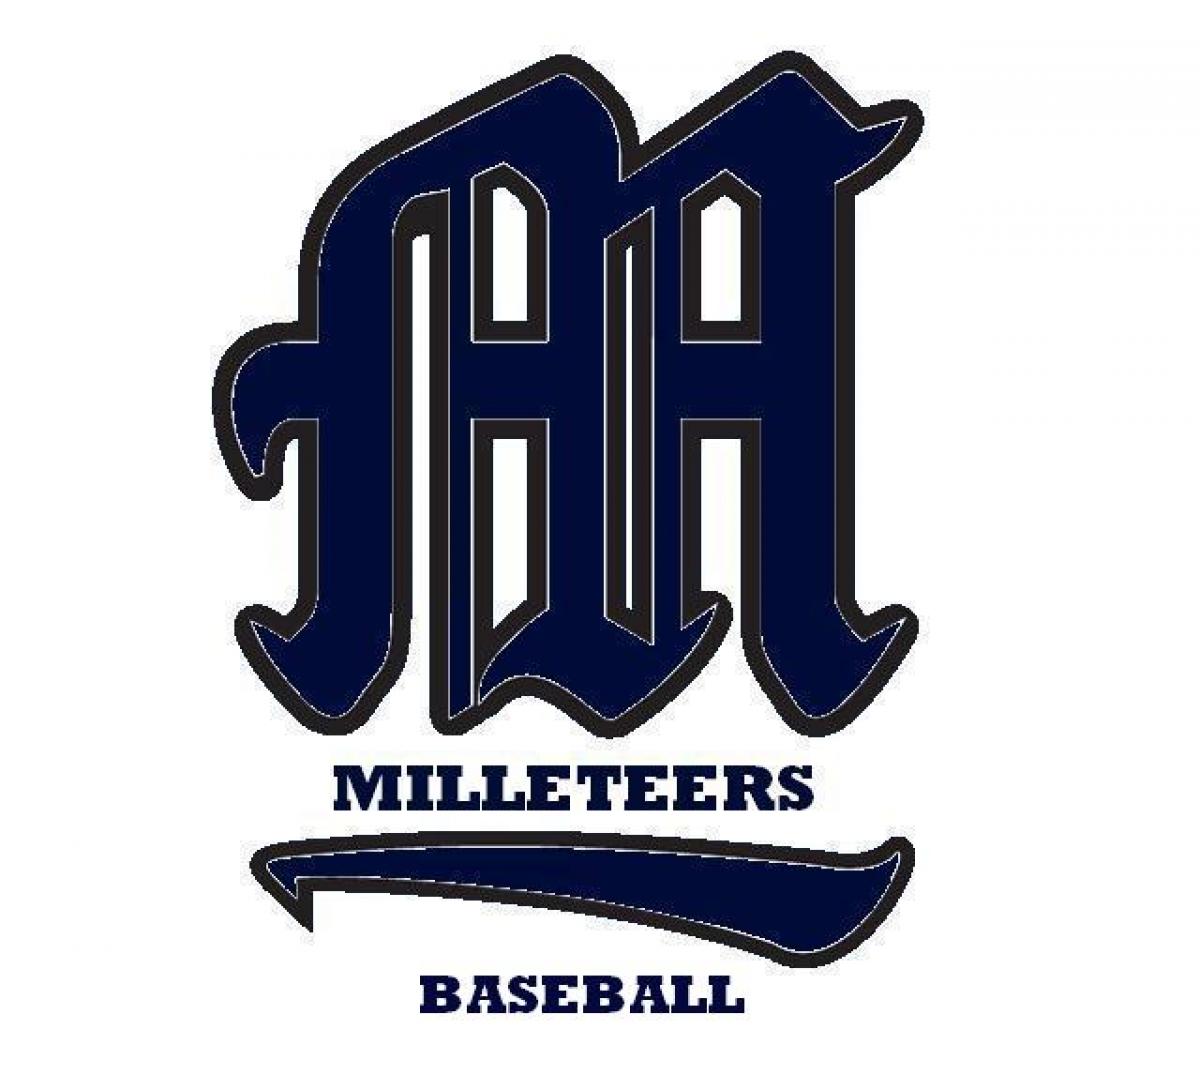 Milleteers Comeback To Take Game One